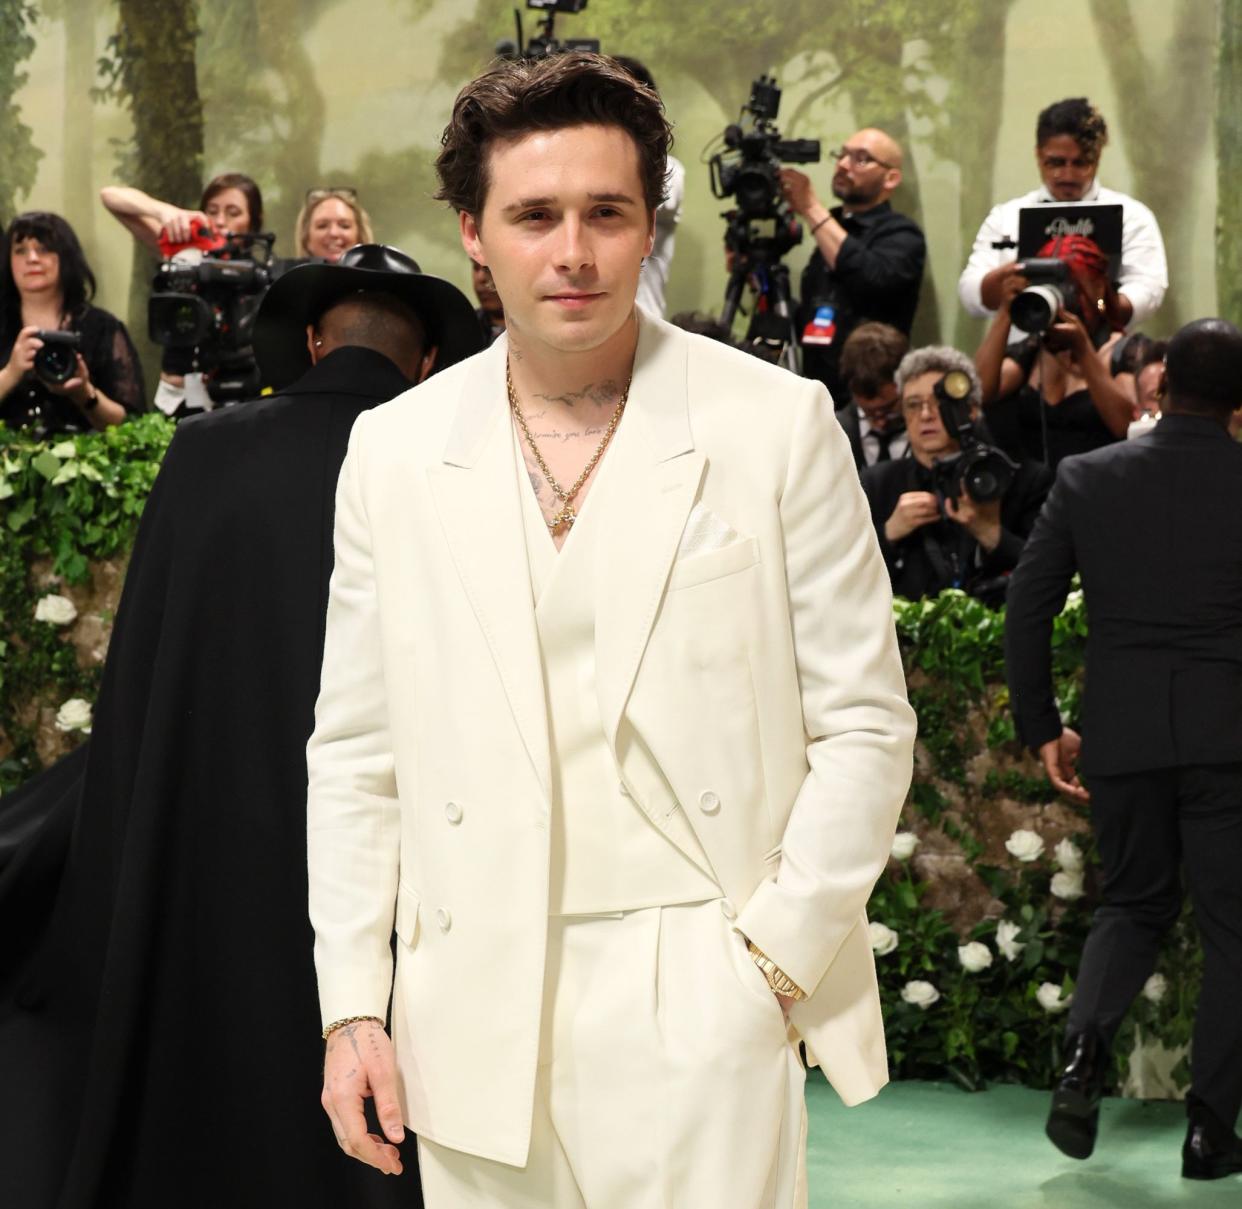 Brooklyn Beckham cuts lonely figure without wife Nicola Peltz at met gala and sparks concern